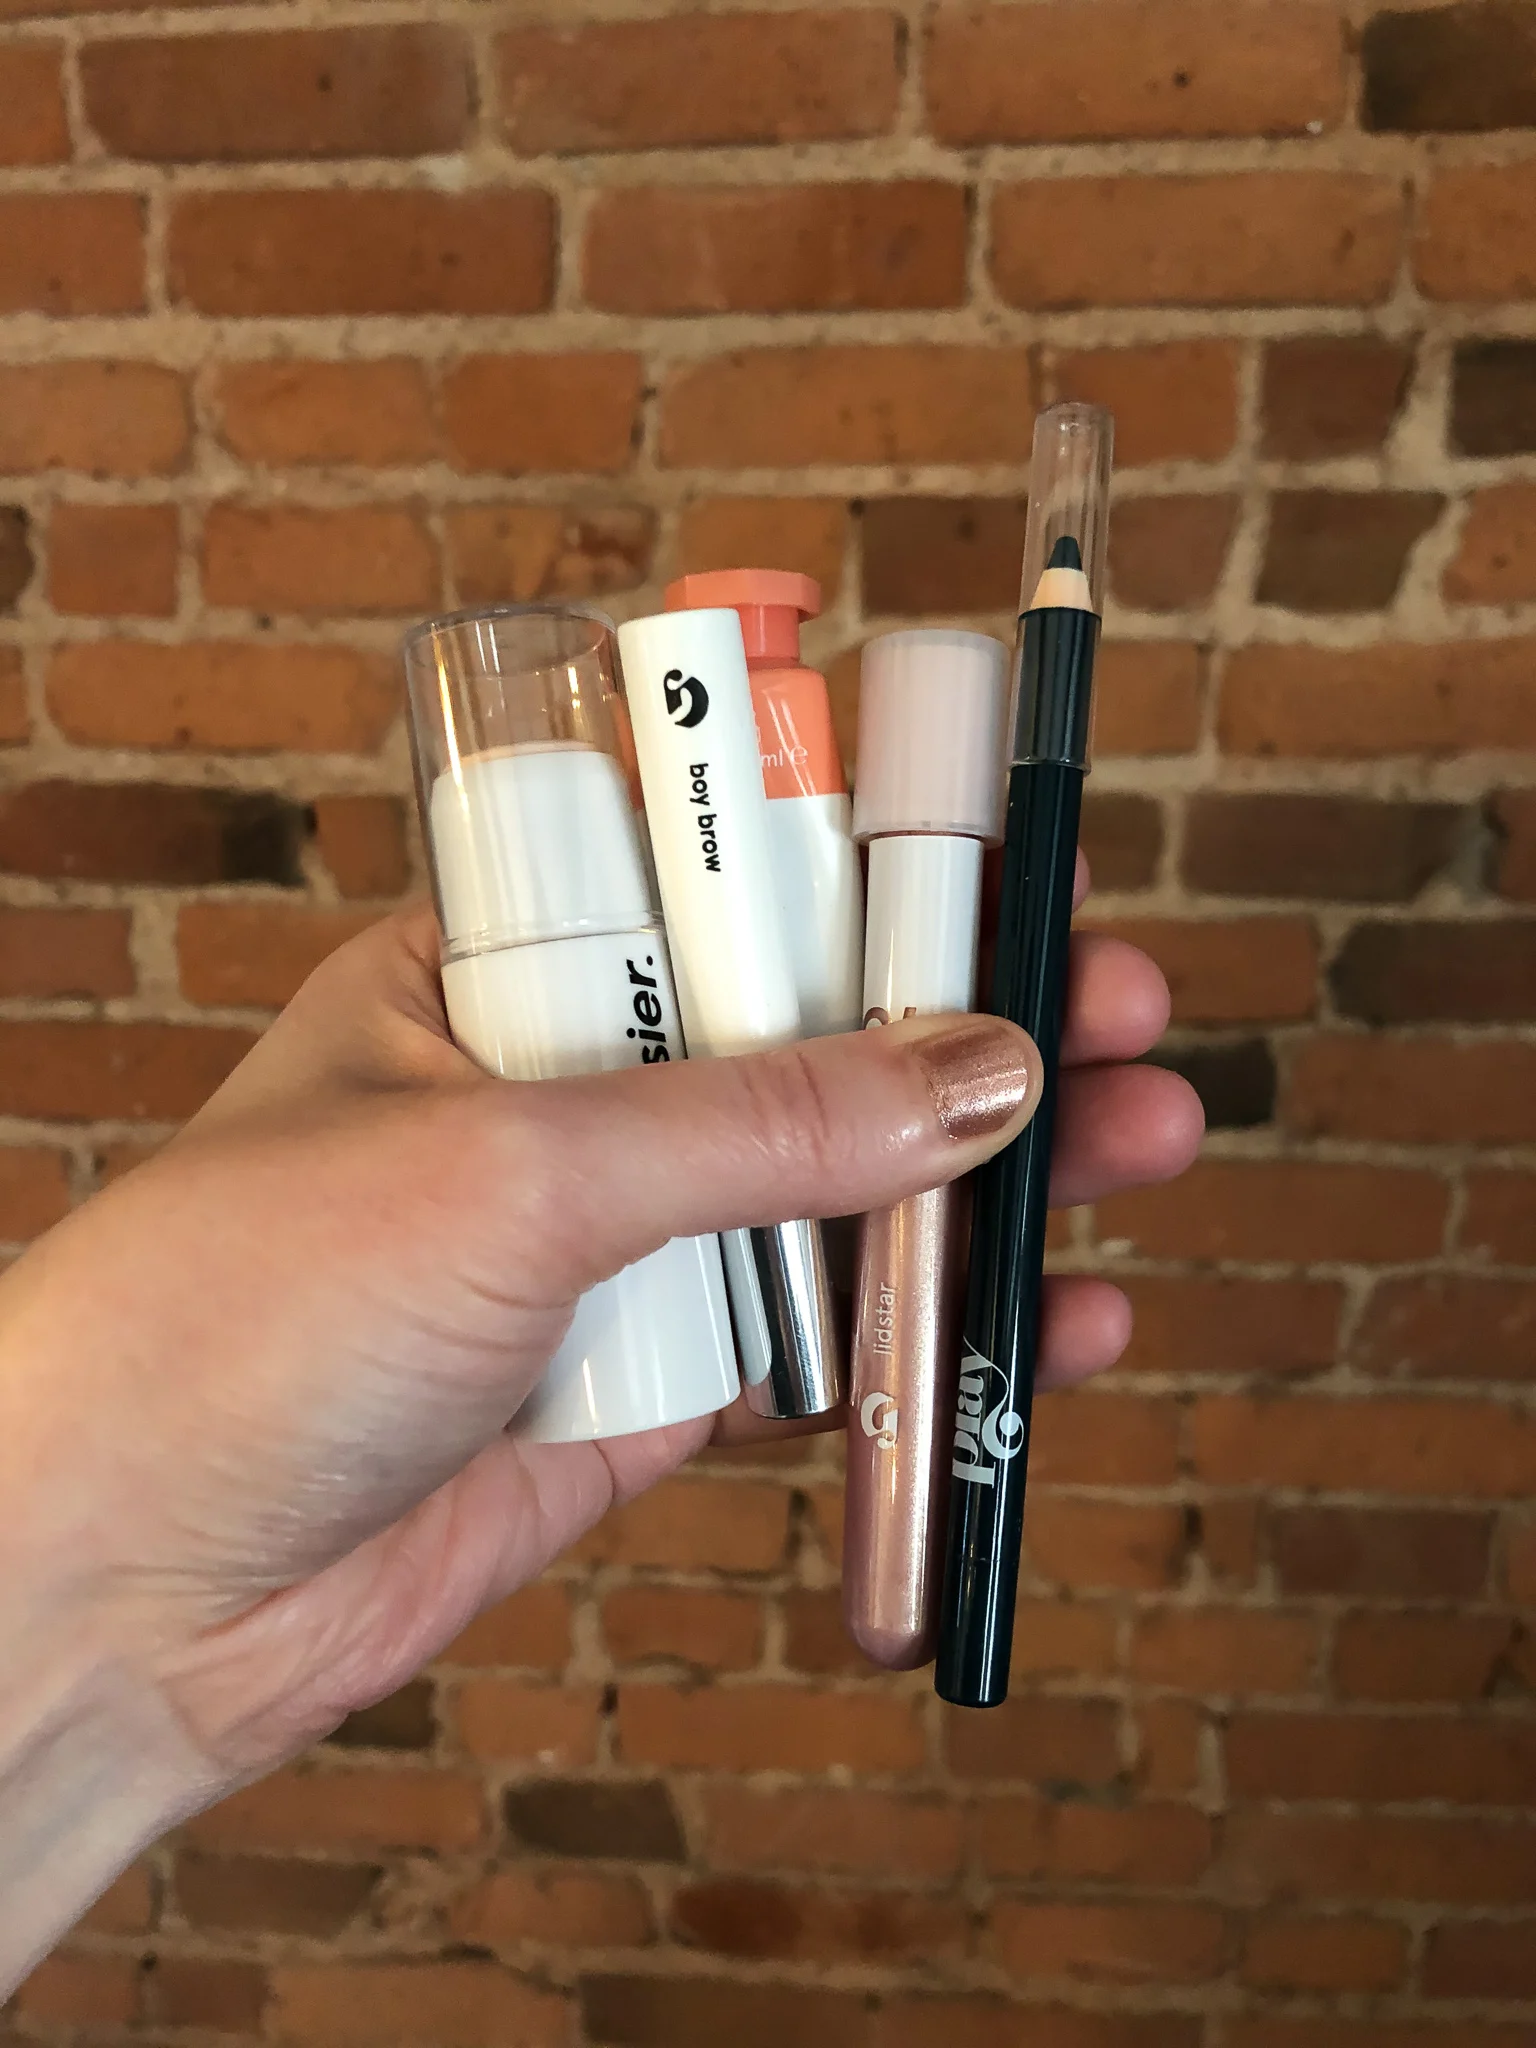 hand holding five glossier products - Glossier Boy Brow Review